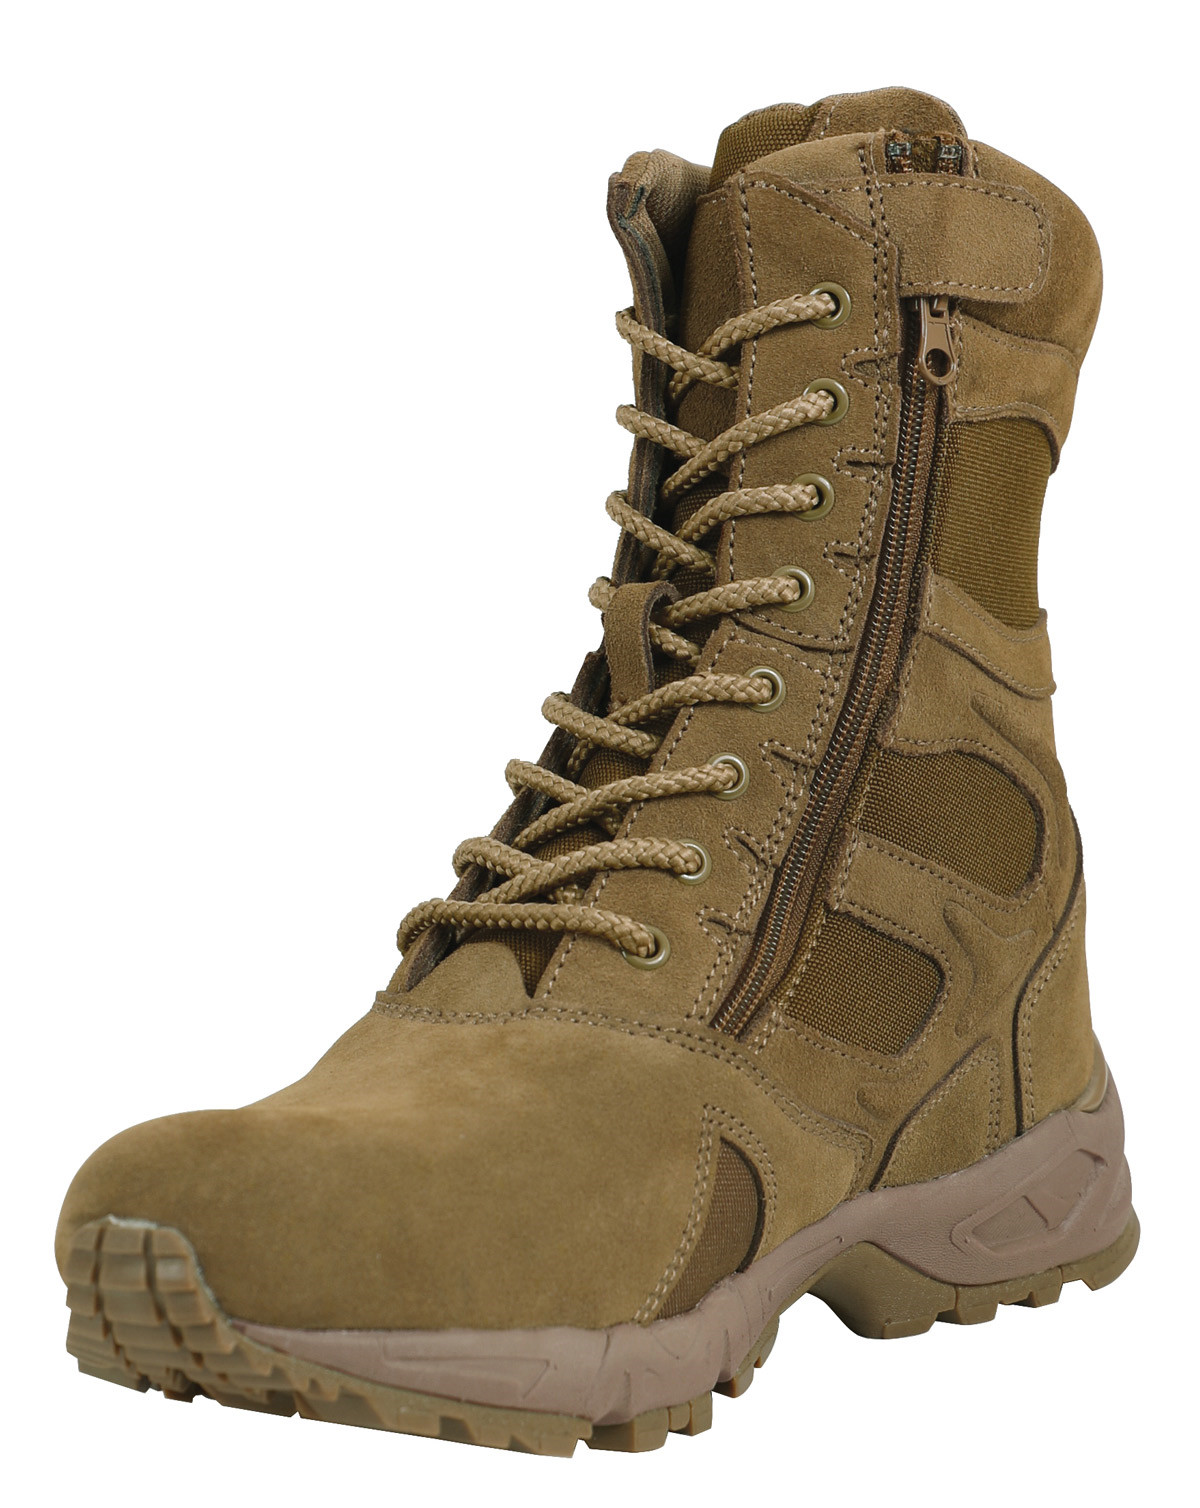 Rothco Forced Entry 8" Deployment Boots With Side Zipper (Coyote Brun, 43 EU / 10 US)